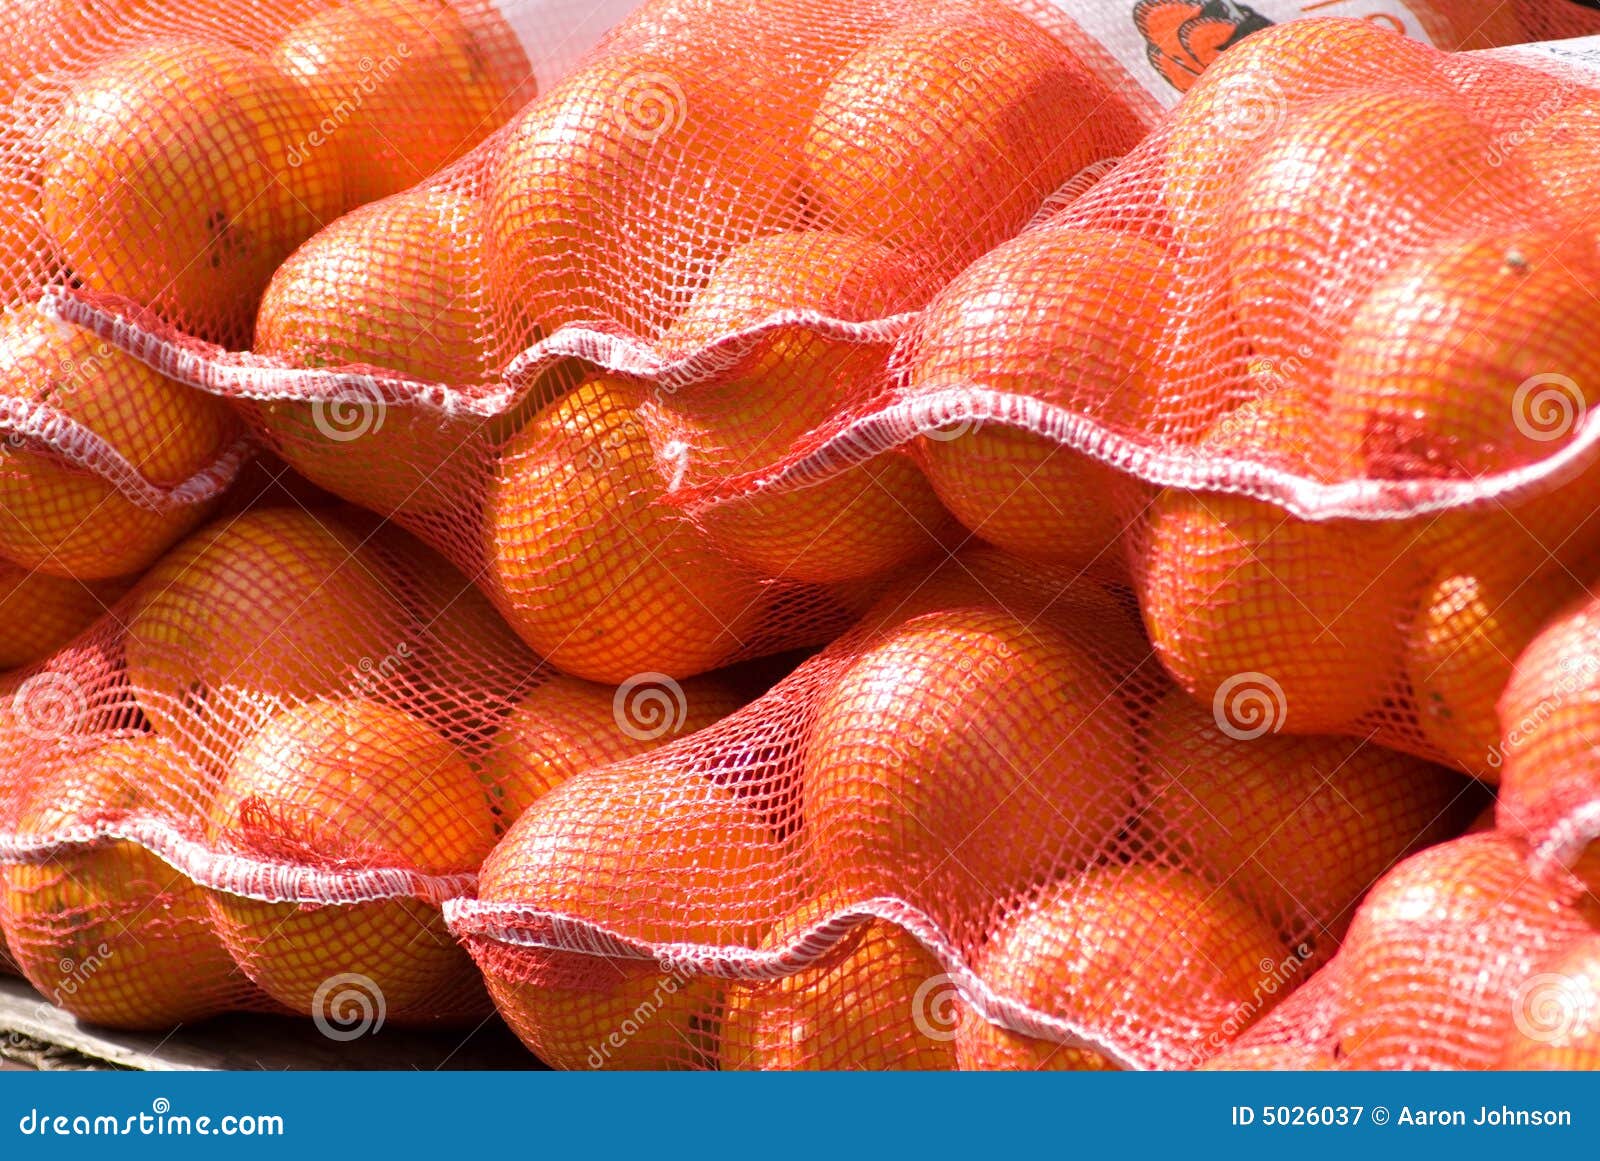 Bag of Oranges stock image. Image of circles, detail, nutritious - 5026037